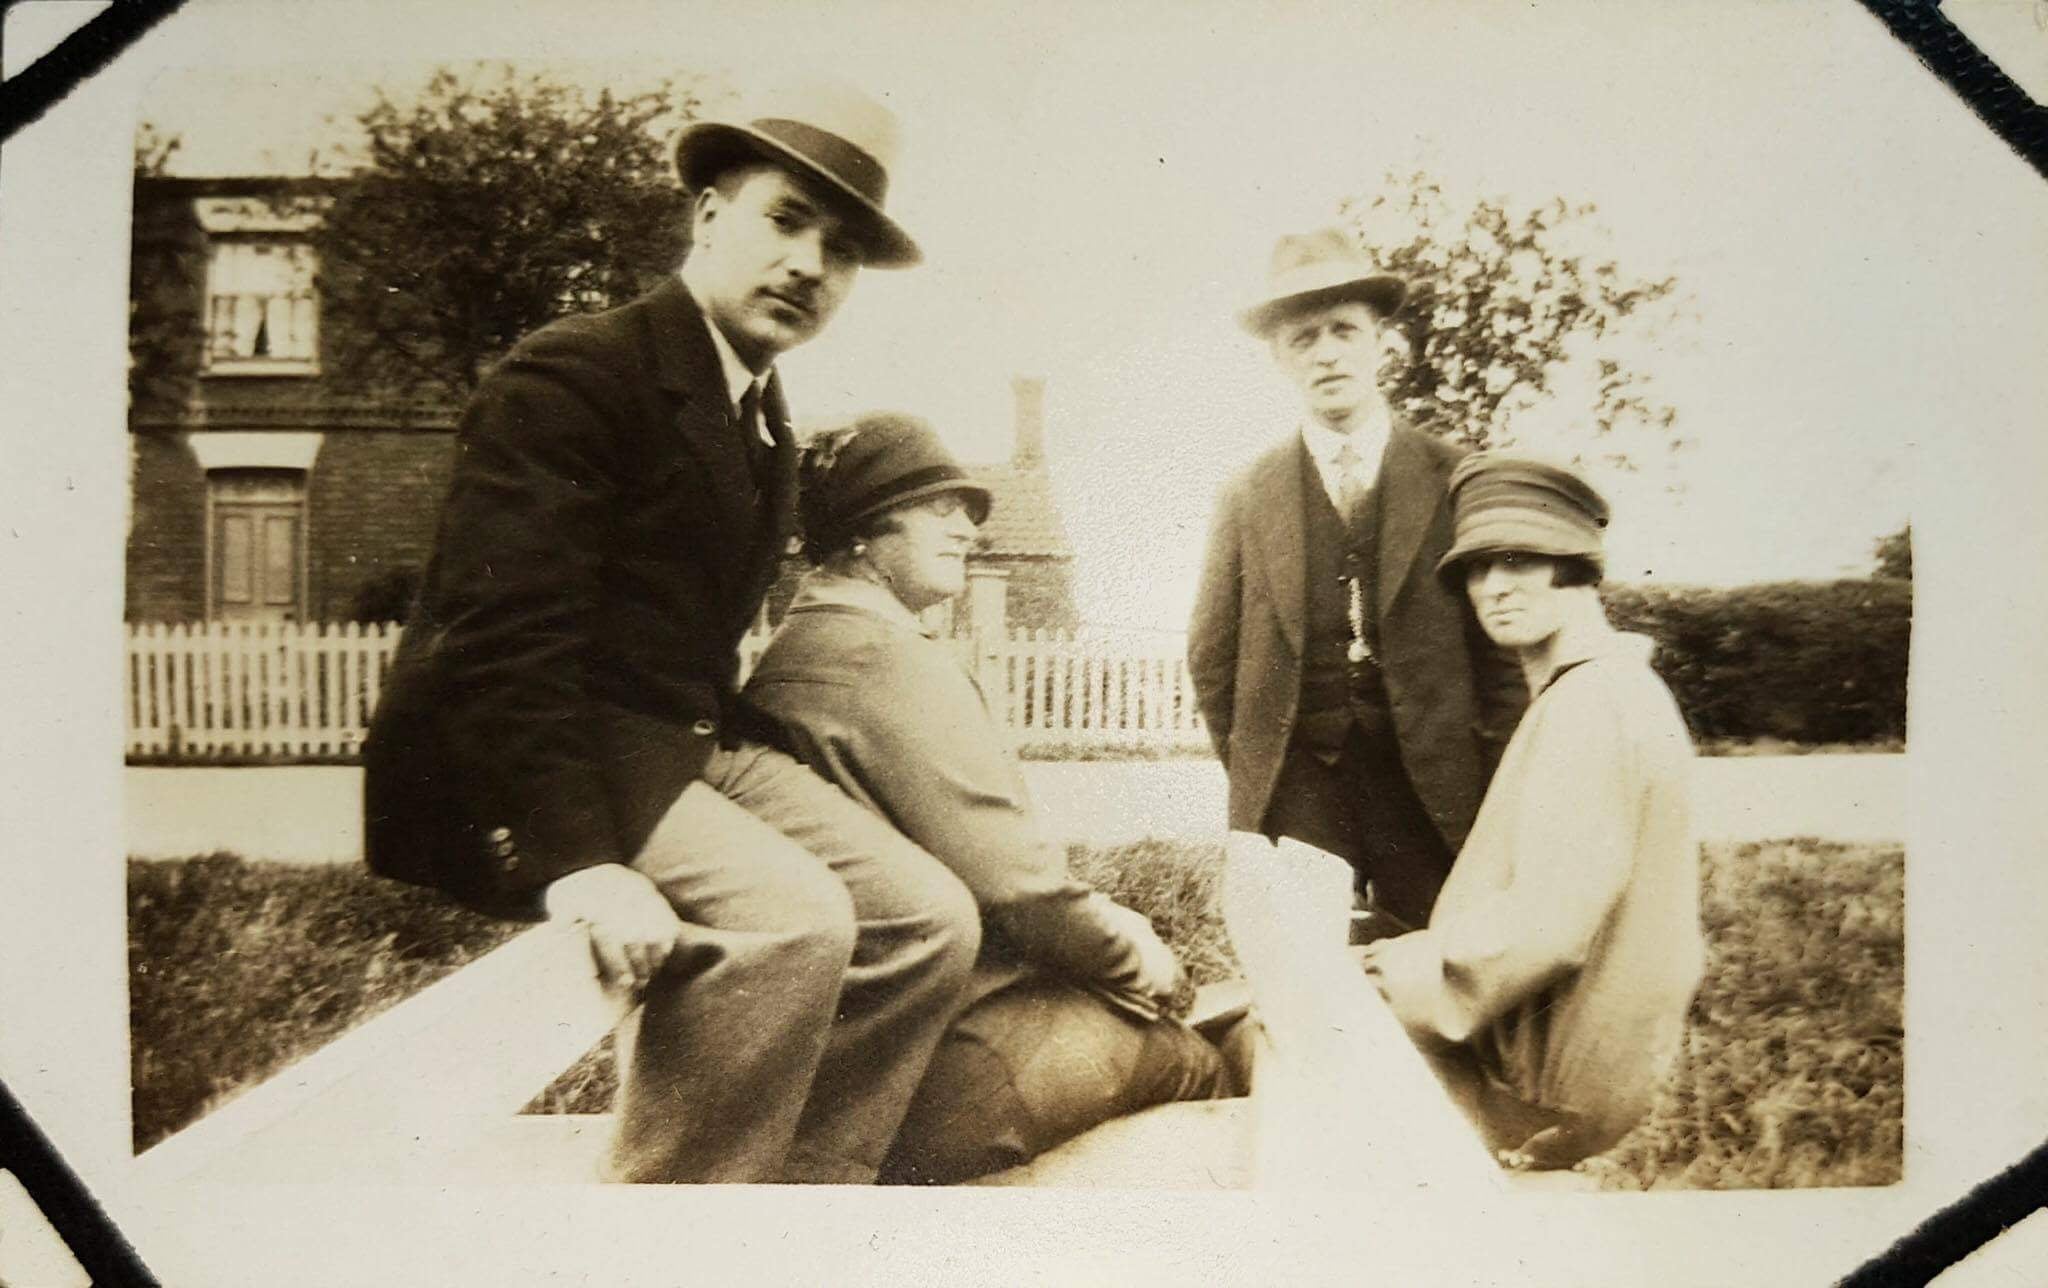 From left to right: Dr John William Cowen (grandather), Ellen Johnstone (née Fearon, great-grandmother), george Johnstone (great-grandfather) and Philippa Cowen (née Johnstone, wife of Dr John Cowen and grandmother) Picture taken late 1920s/early 1930s